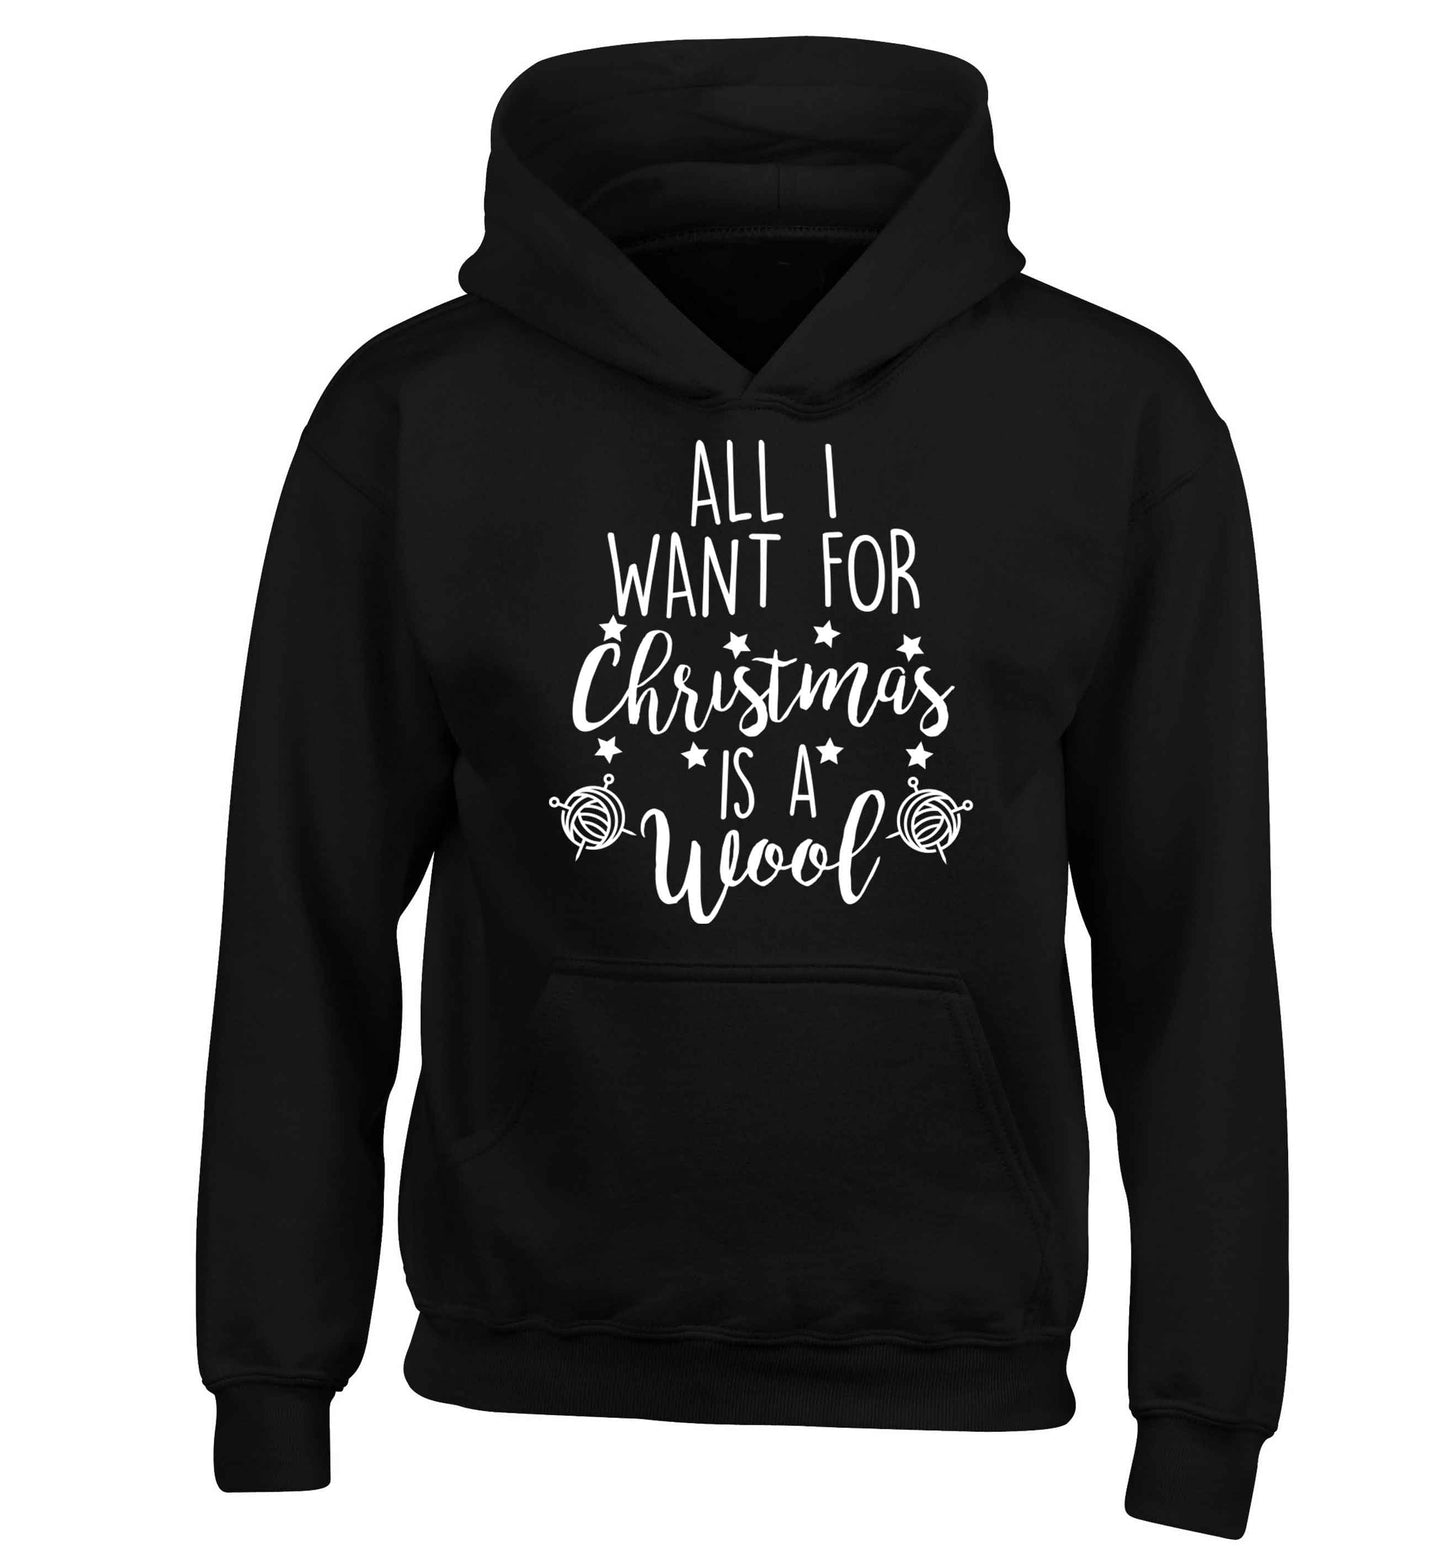 All I want for Christmas is wool! children's black hoodie 12-13 Years